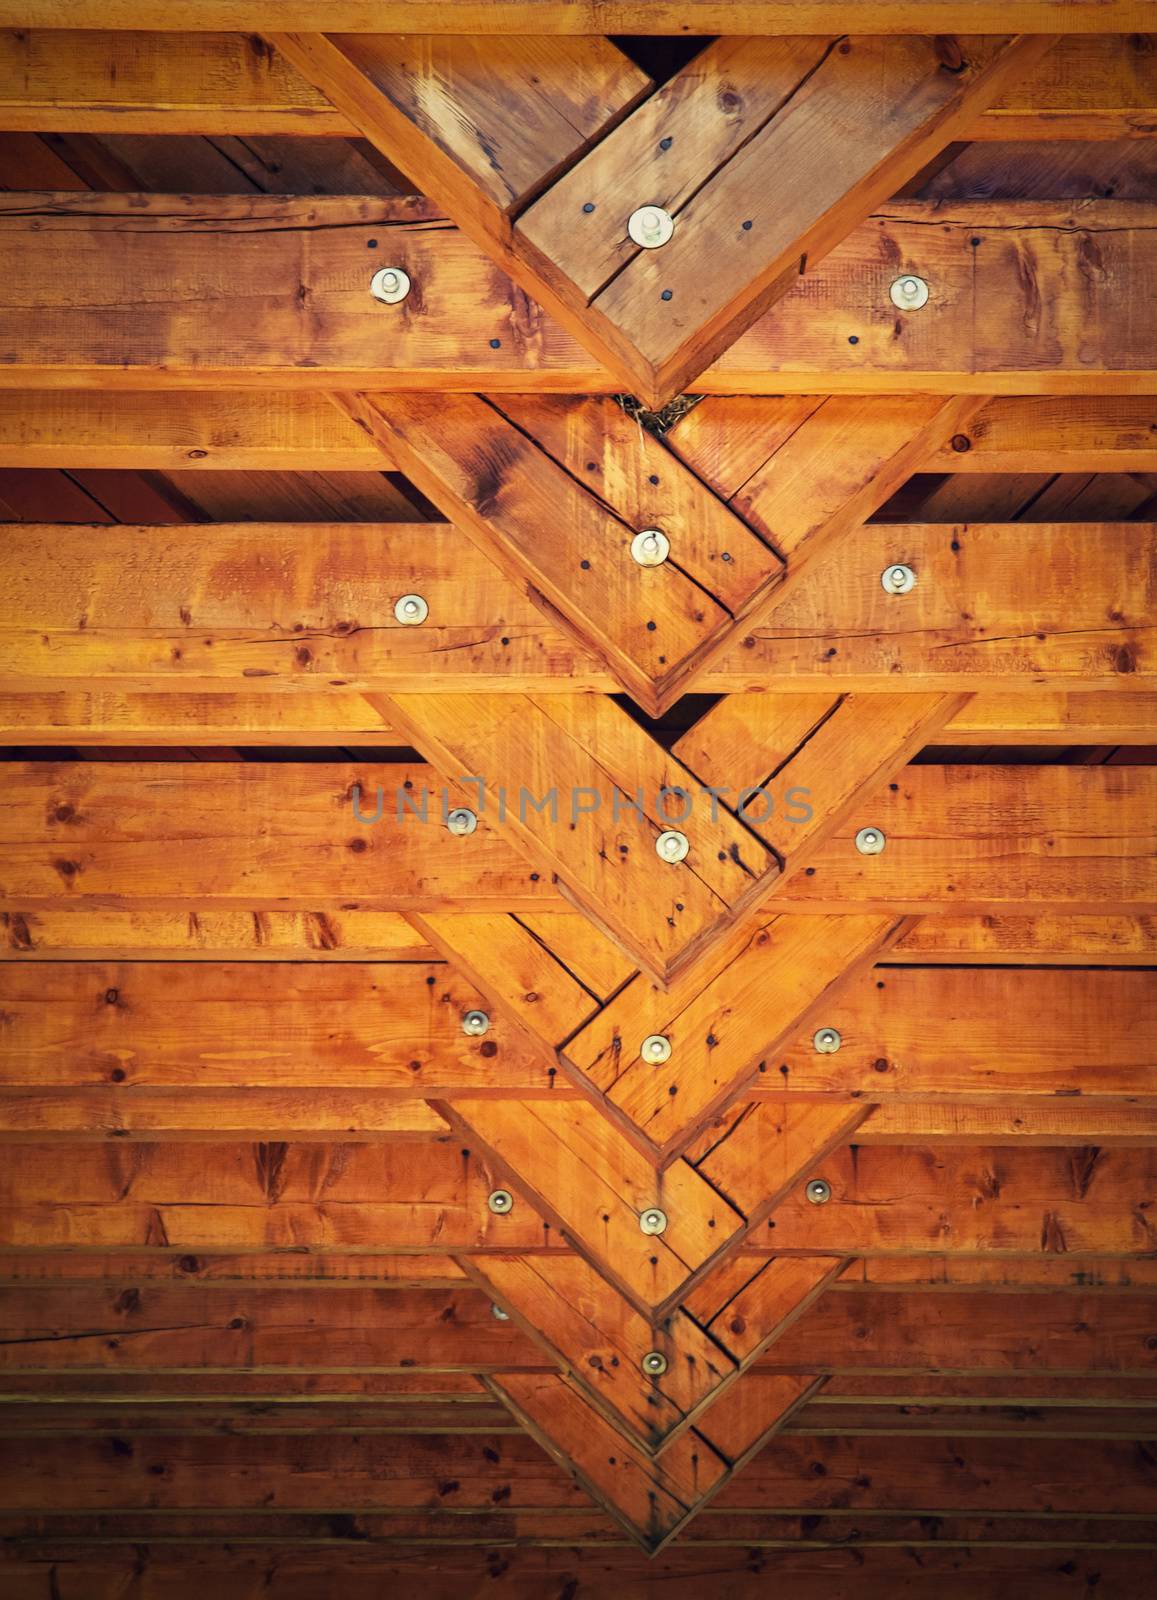 background or texture detail thewood beam truss roof